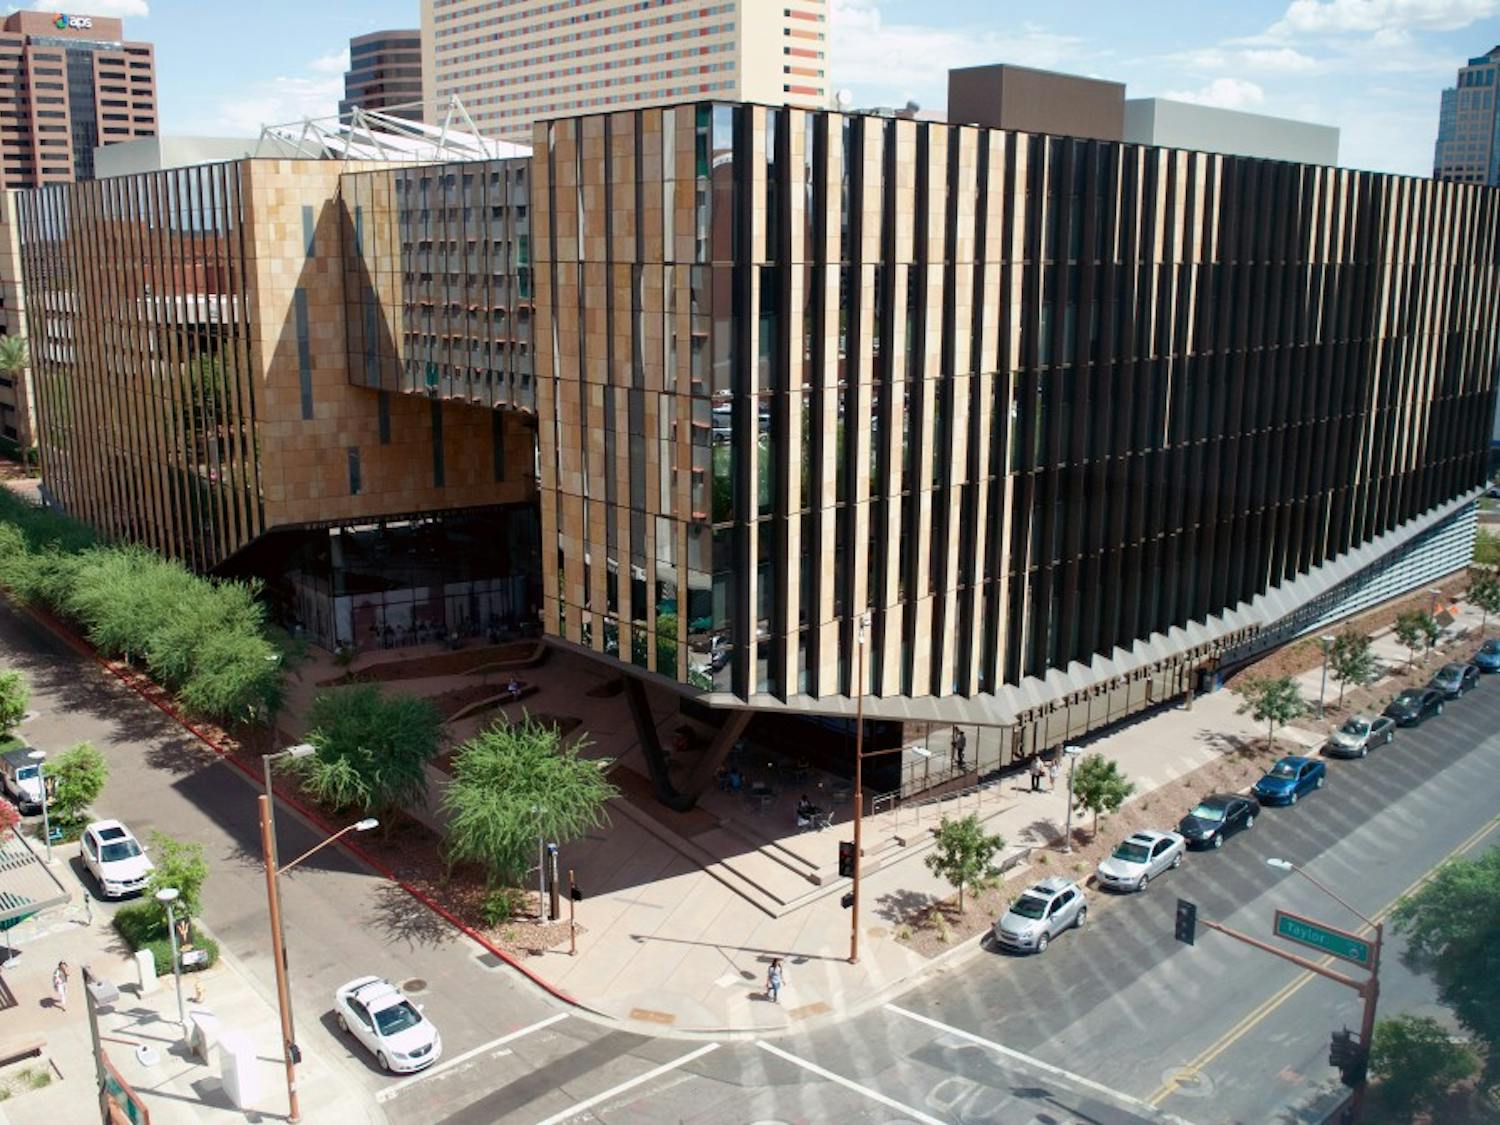 The Arizona Center for Law and Society on the Downtown Phoenix campus is seen on Monday, Aug. 22, 2016. The school's new building opened this semester after more than two years of construction.